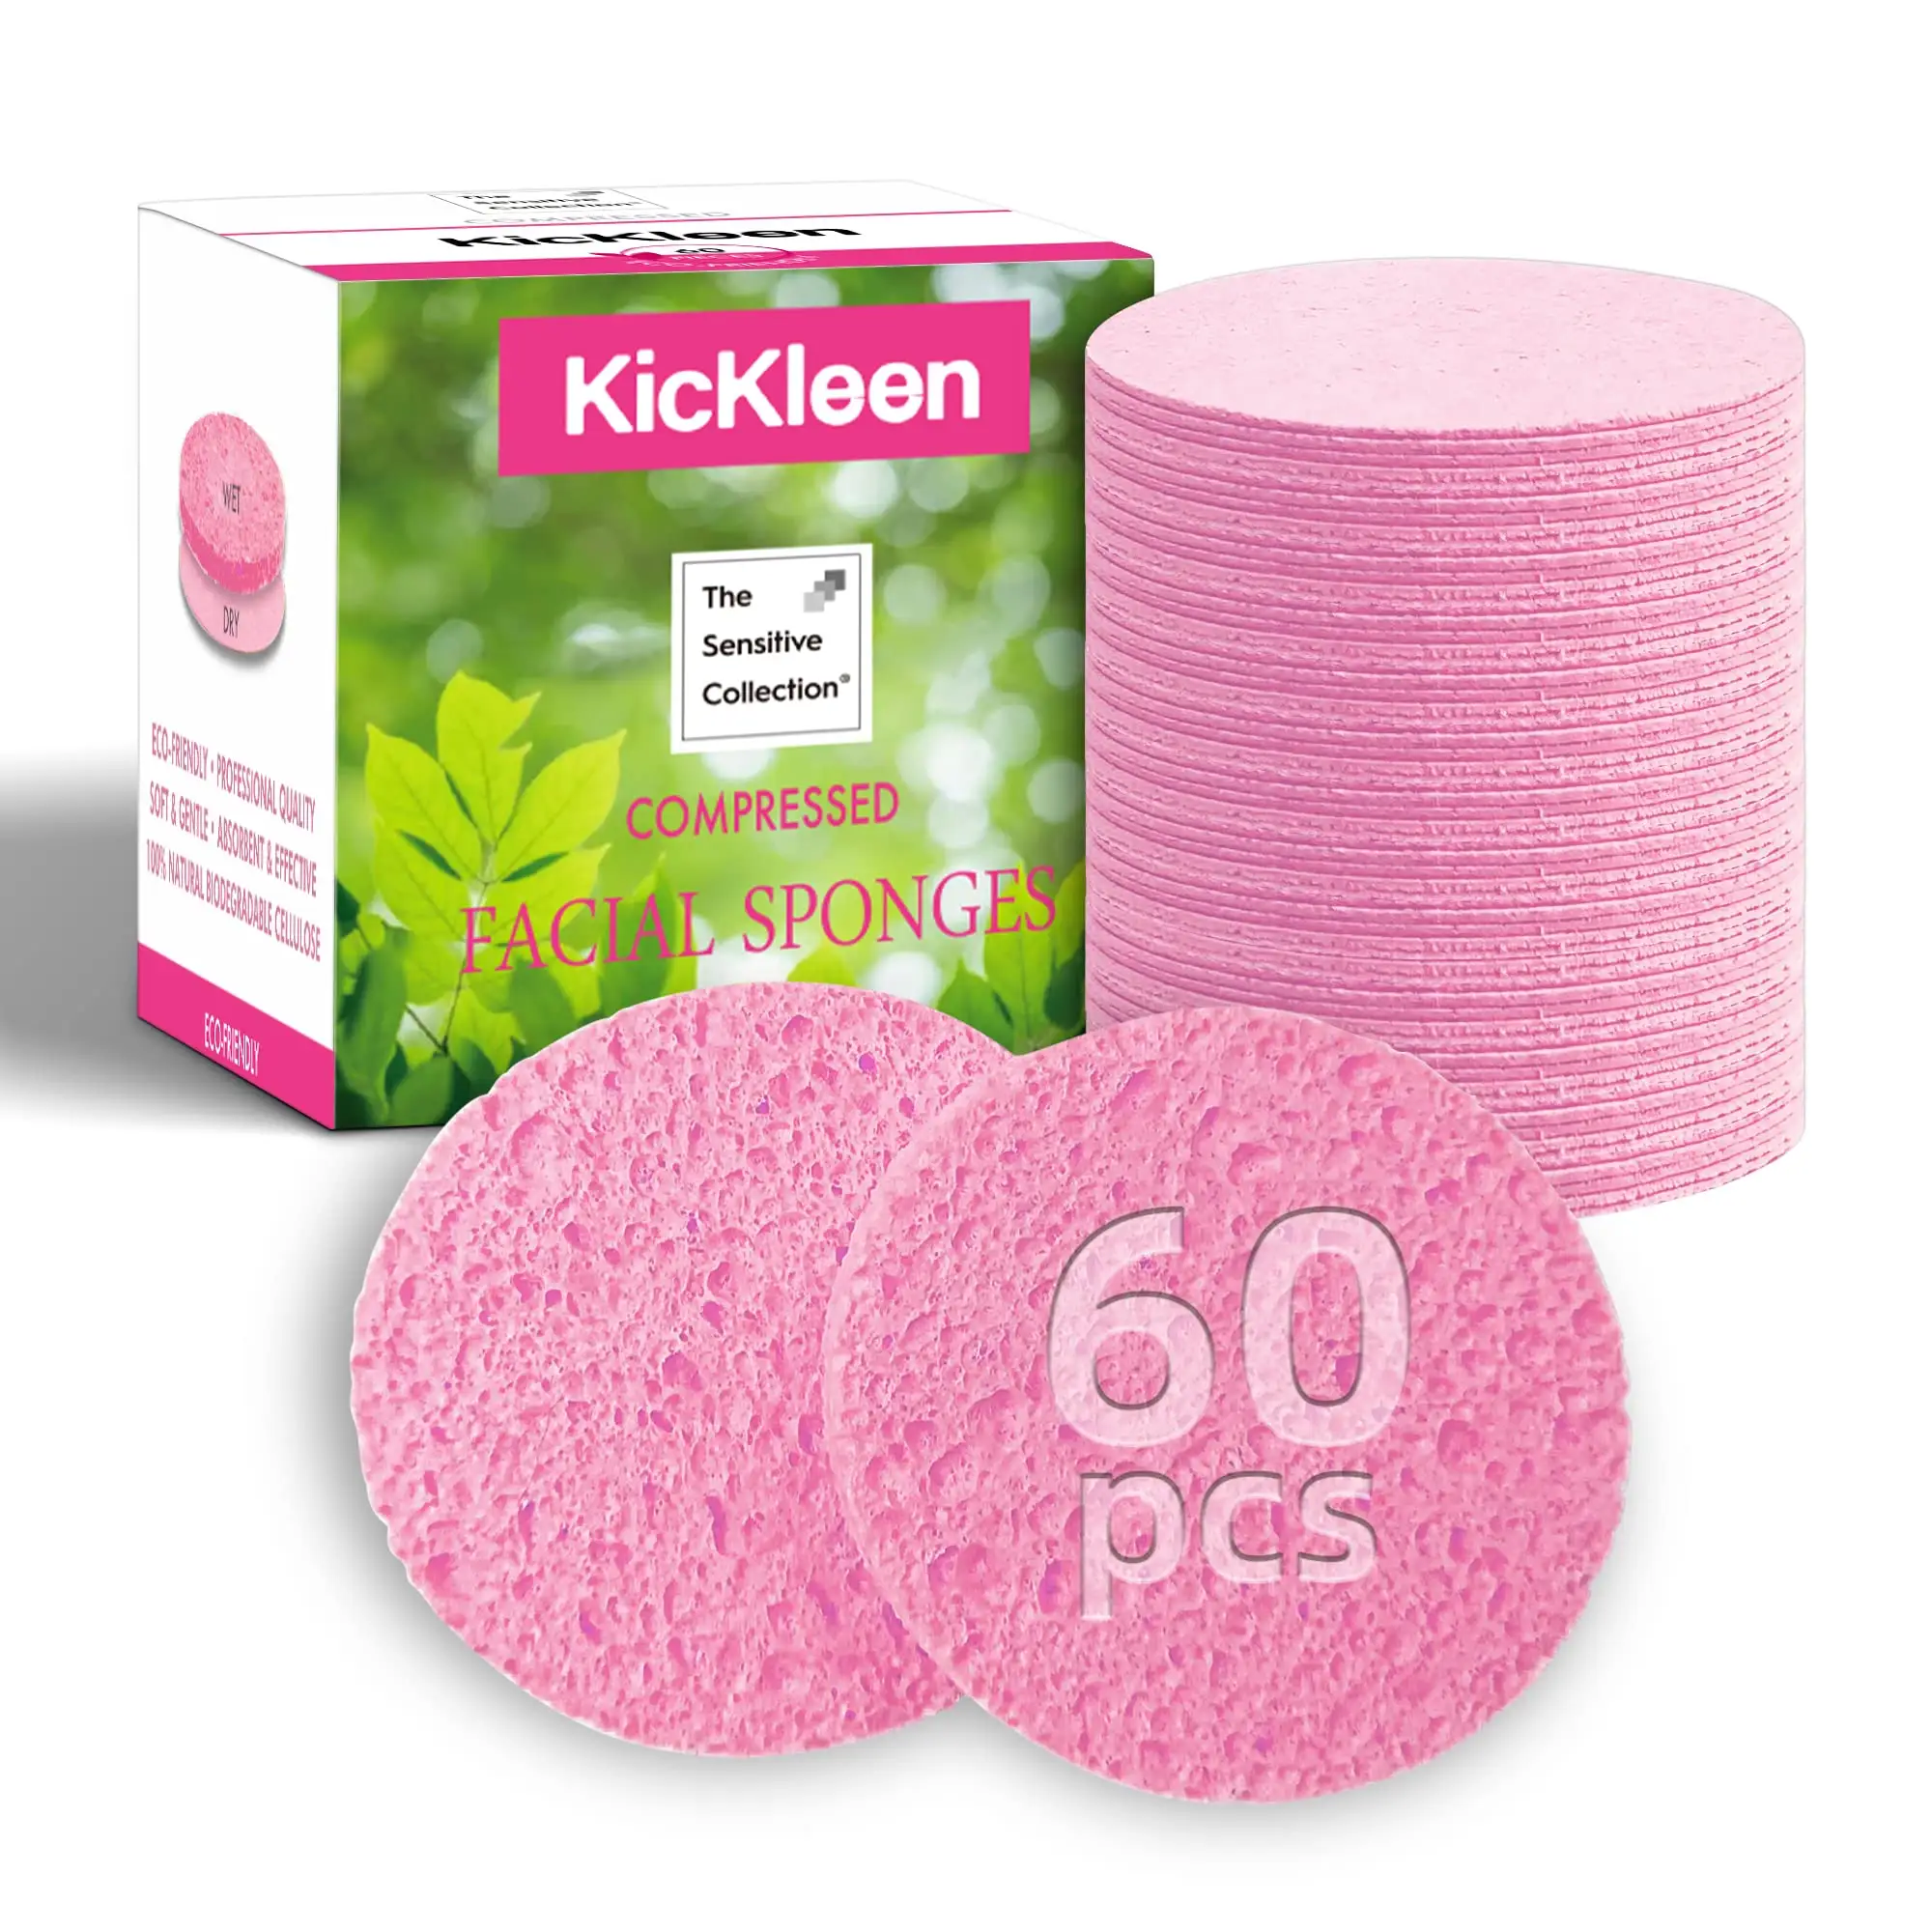 60 Count Compressed Facial Sponge100% Natural Kickleen Cellulose Cosmetic Spa Sponges For Daily Facial Cleansing Makeup And Mask